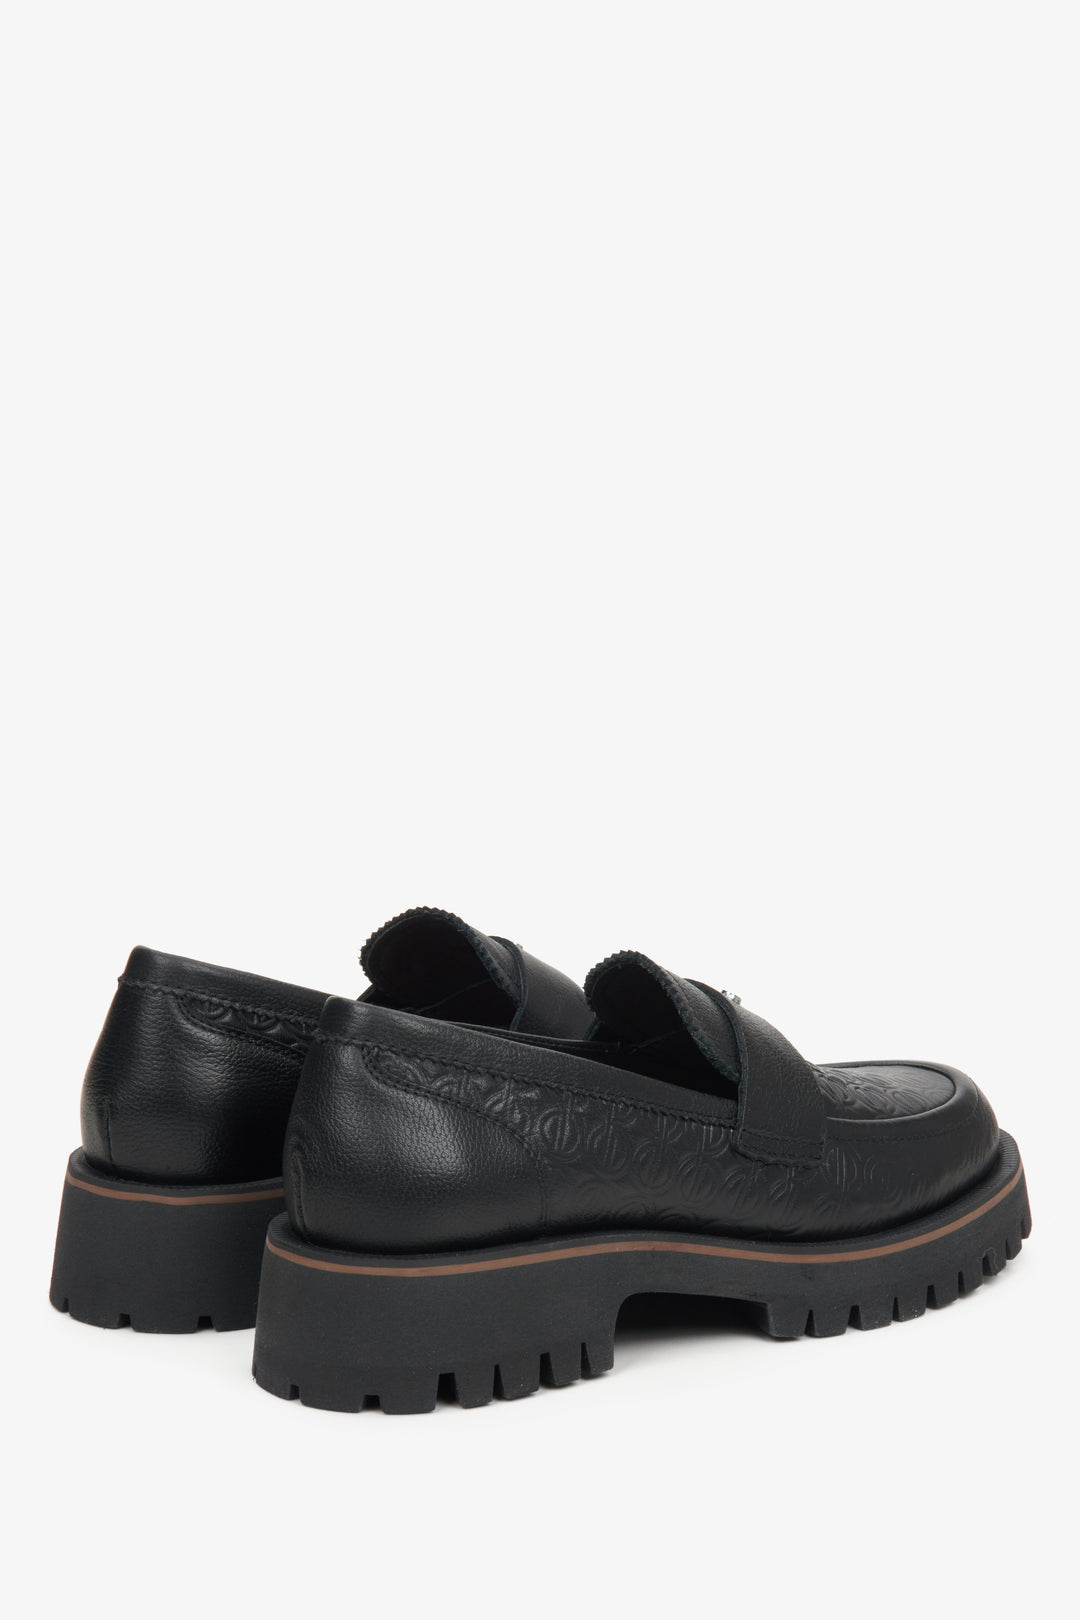 Women's black leather loafers by Estro - close-up on the heel and side line of the shoe.